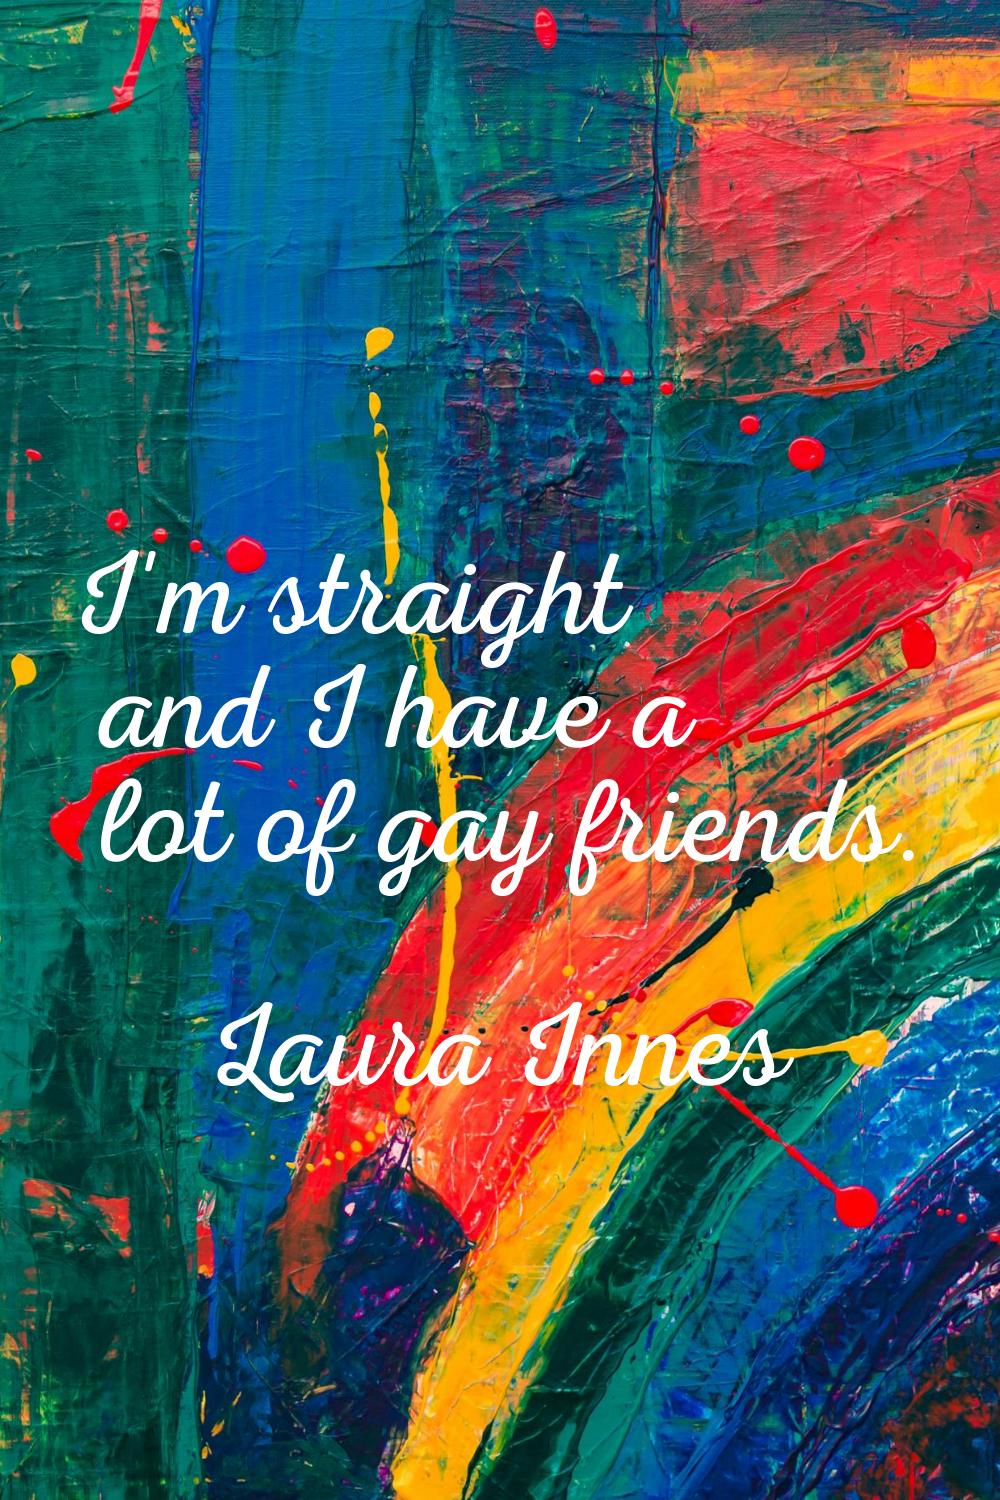 I'm straight and I have a lot of gay friends.